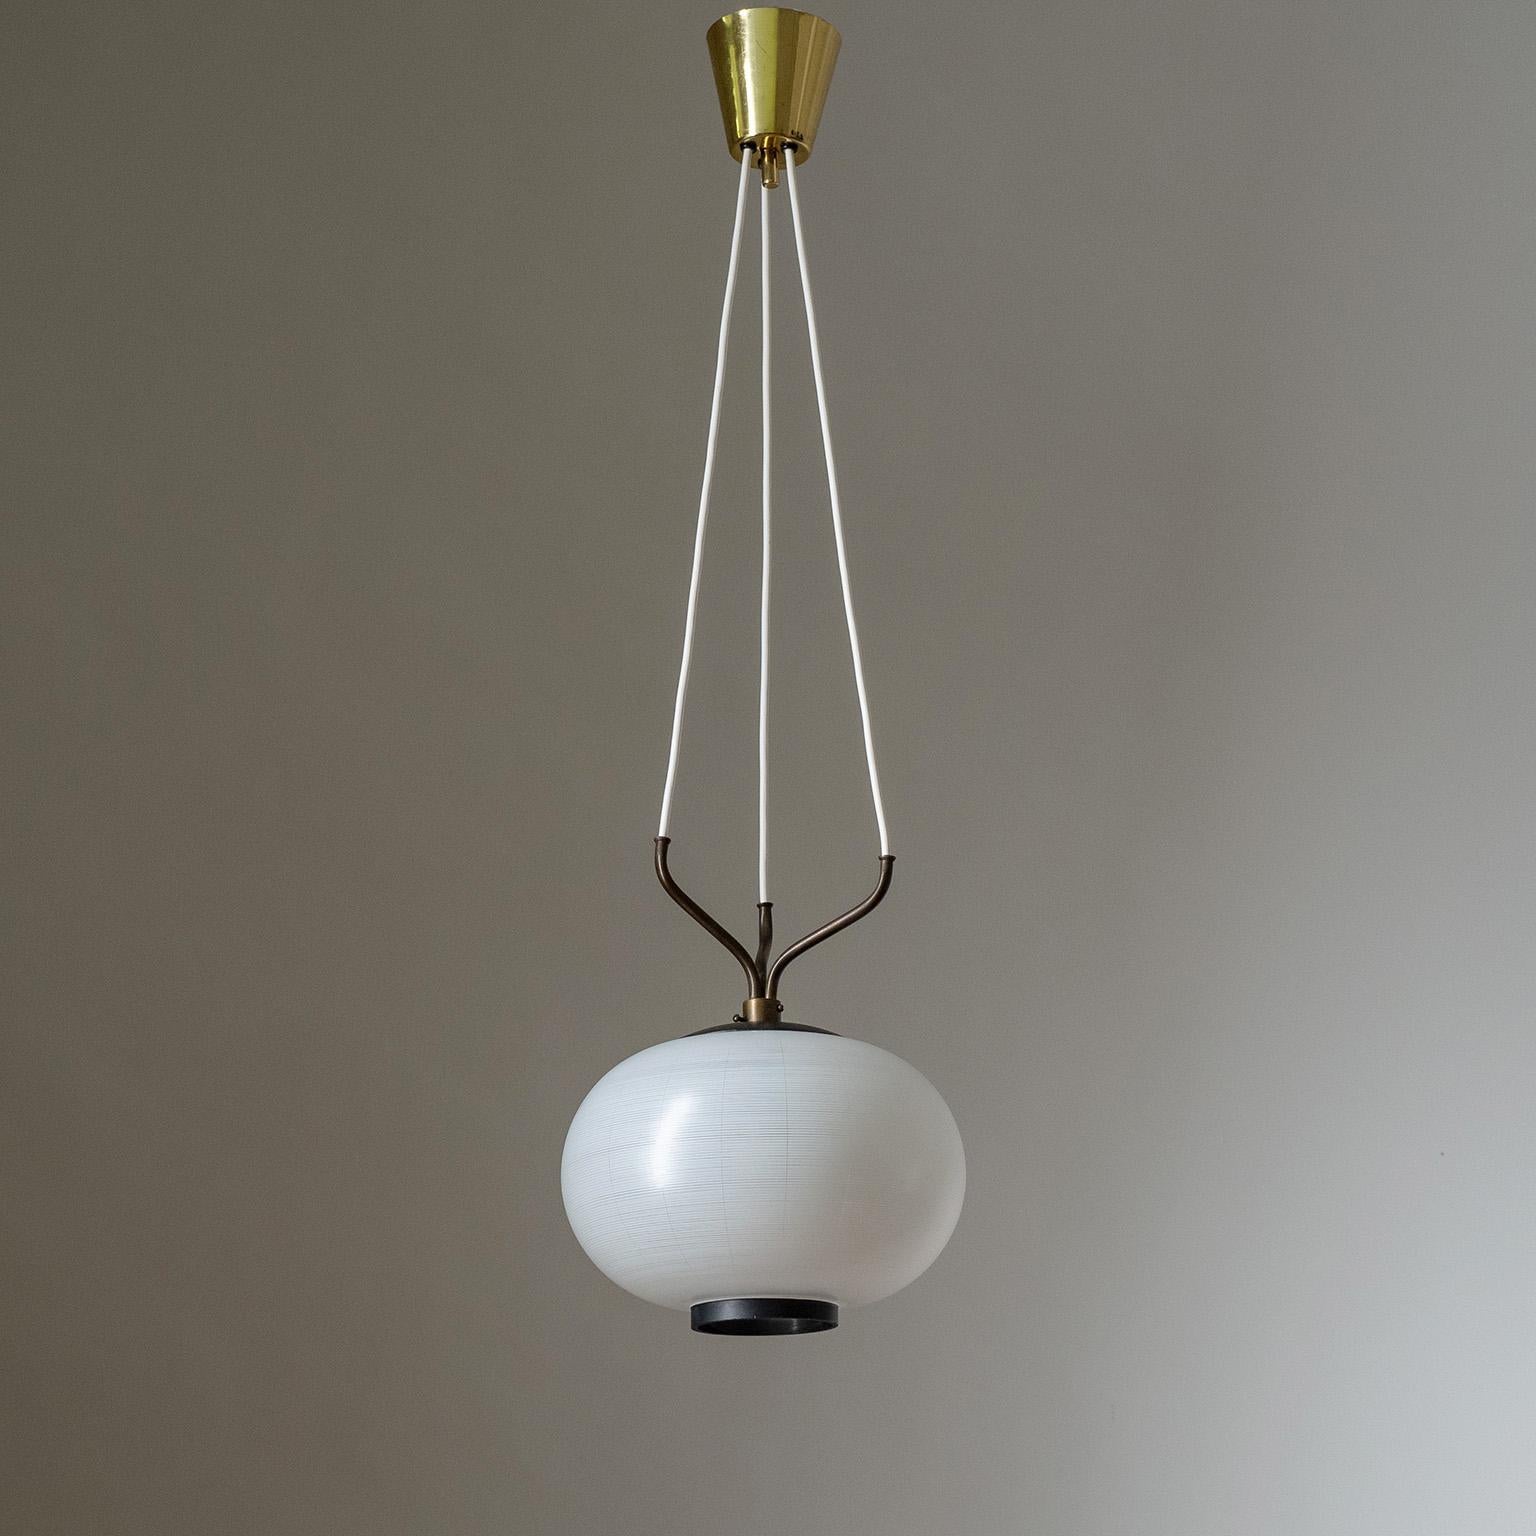 Fine Italian suspension light from the 1950s. The glass diffuser, which is enameled with a white pinstripe decor and black rim, is suspended by wires which lead into a three-pronged brass fixture. One original brass and ceramic E27 socket with new